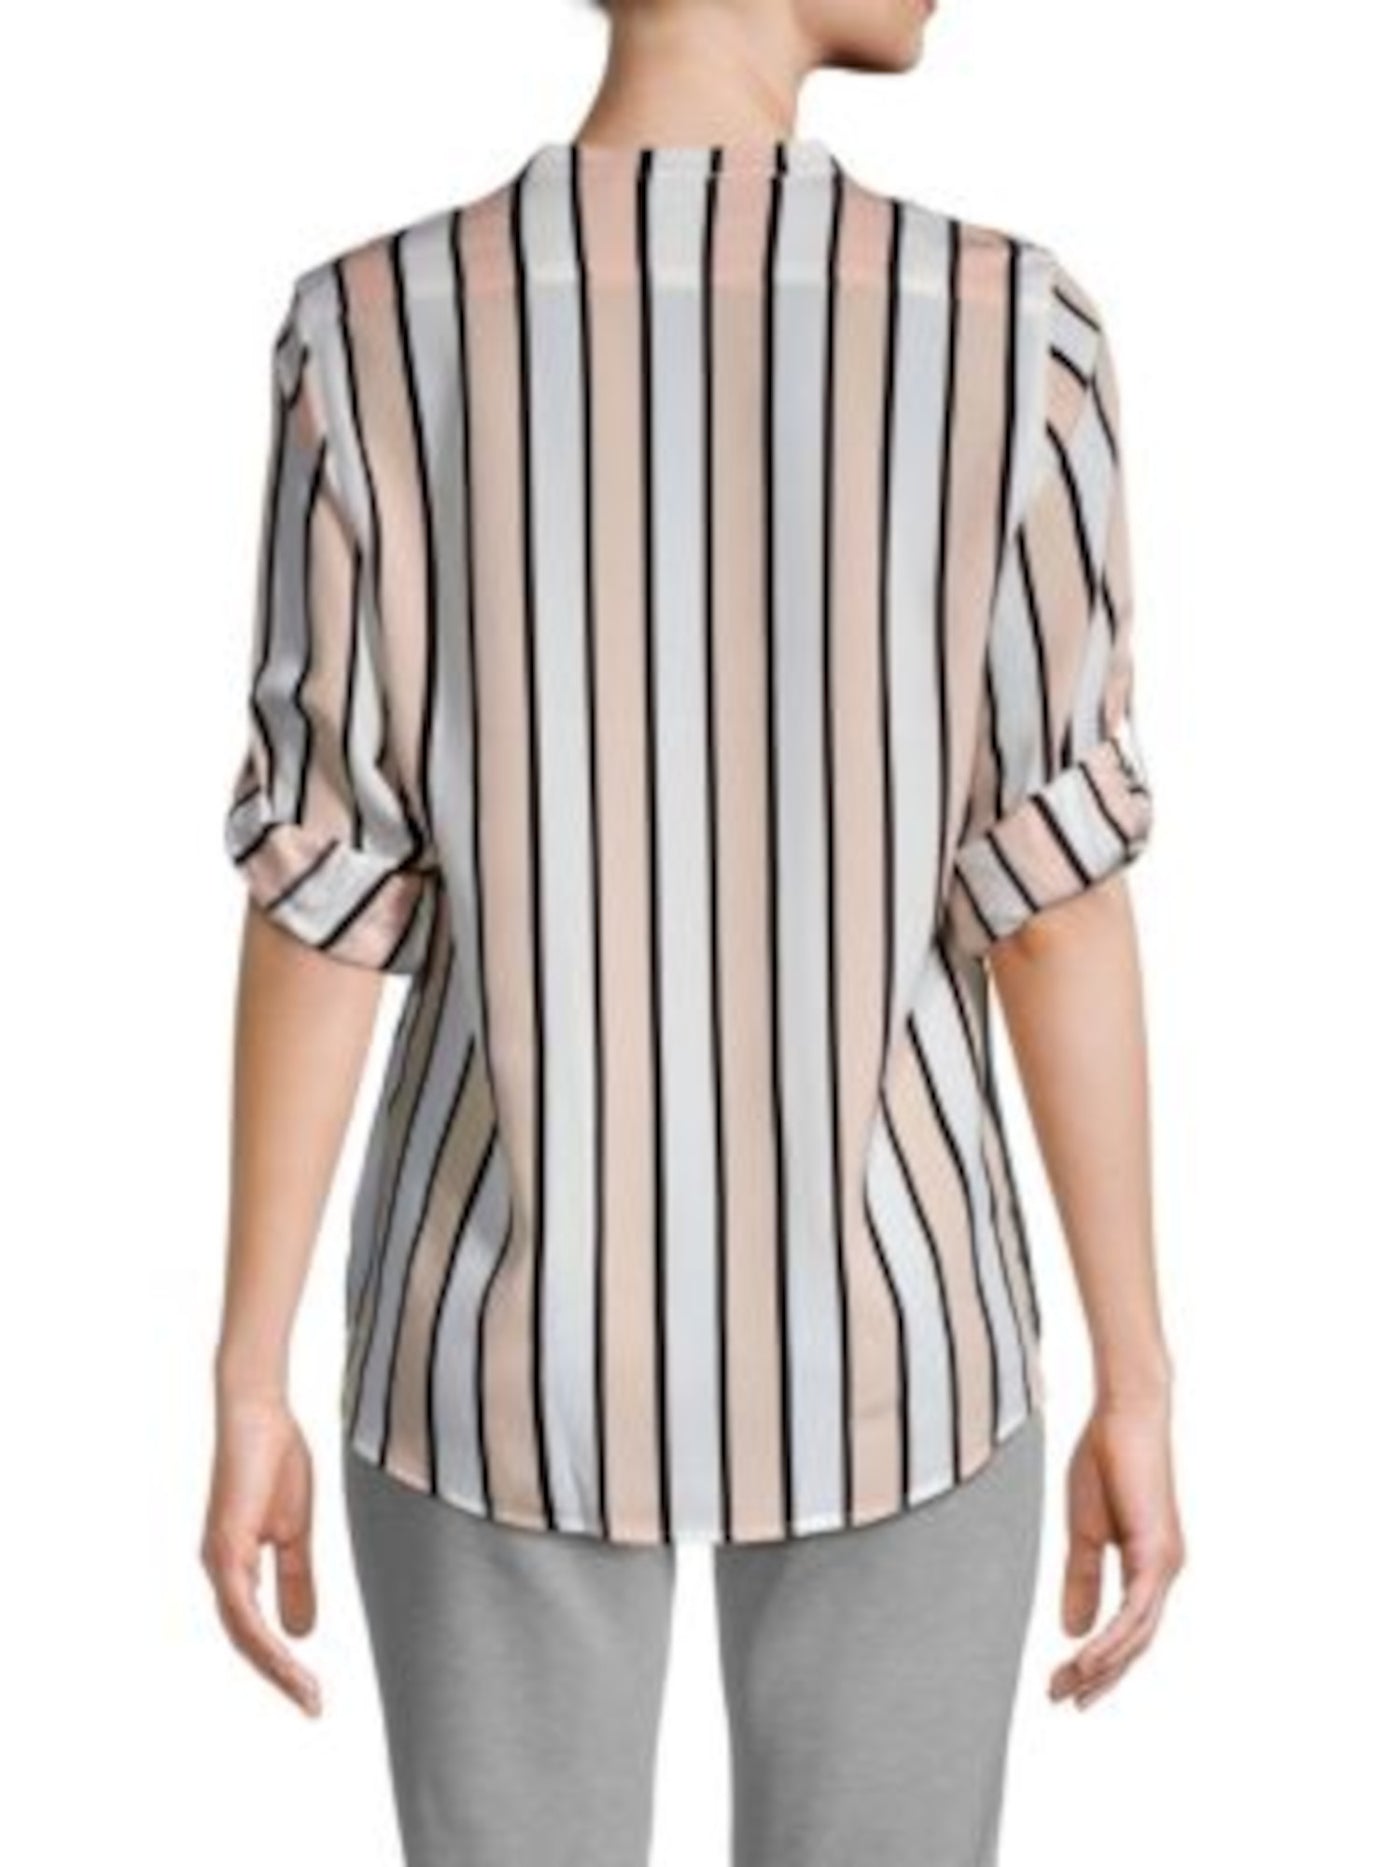 CALVIN KLEIN Womens White Striped Roll-tab Sleeve V Neck Wear To Work Button Up Top S